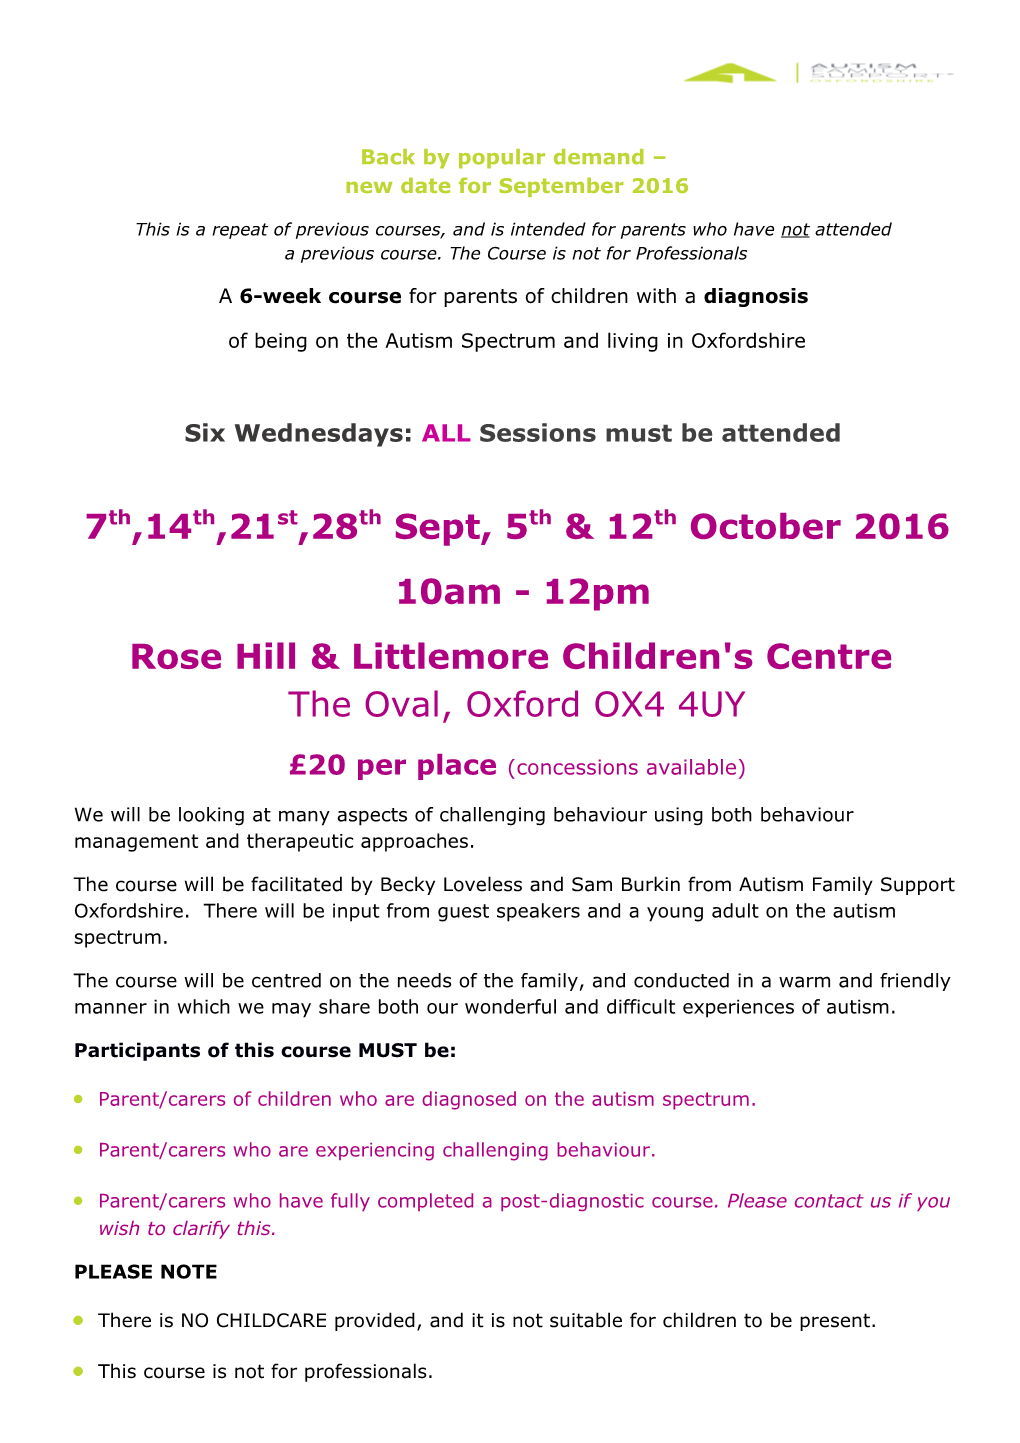 A 6-Week Course for Parents of Children with a Diagnosis